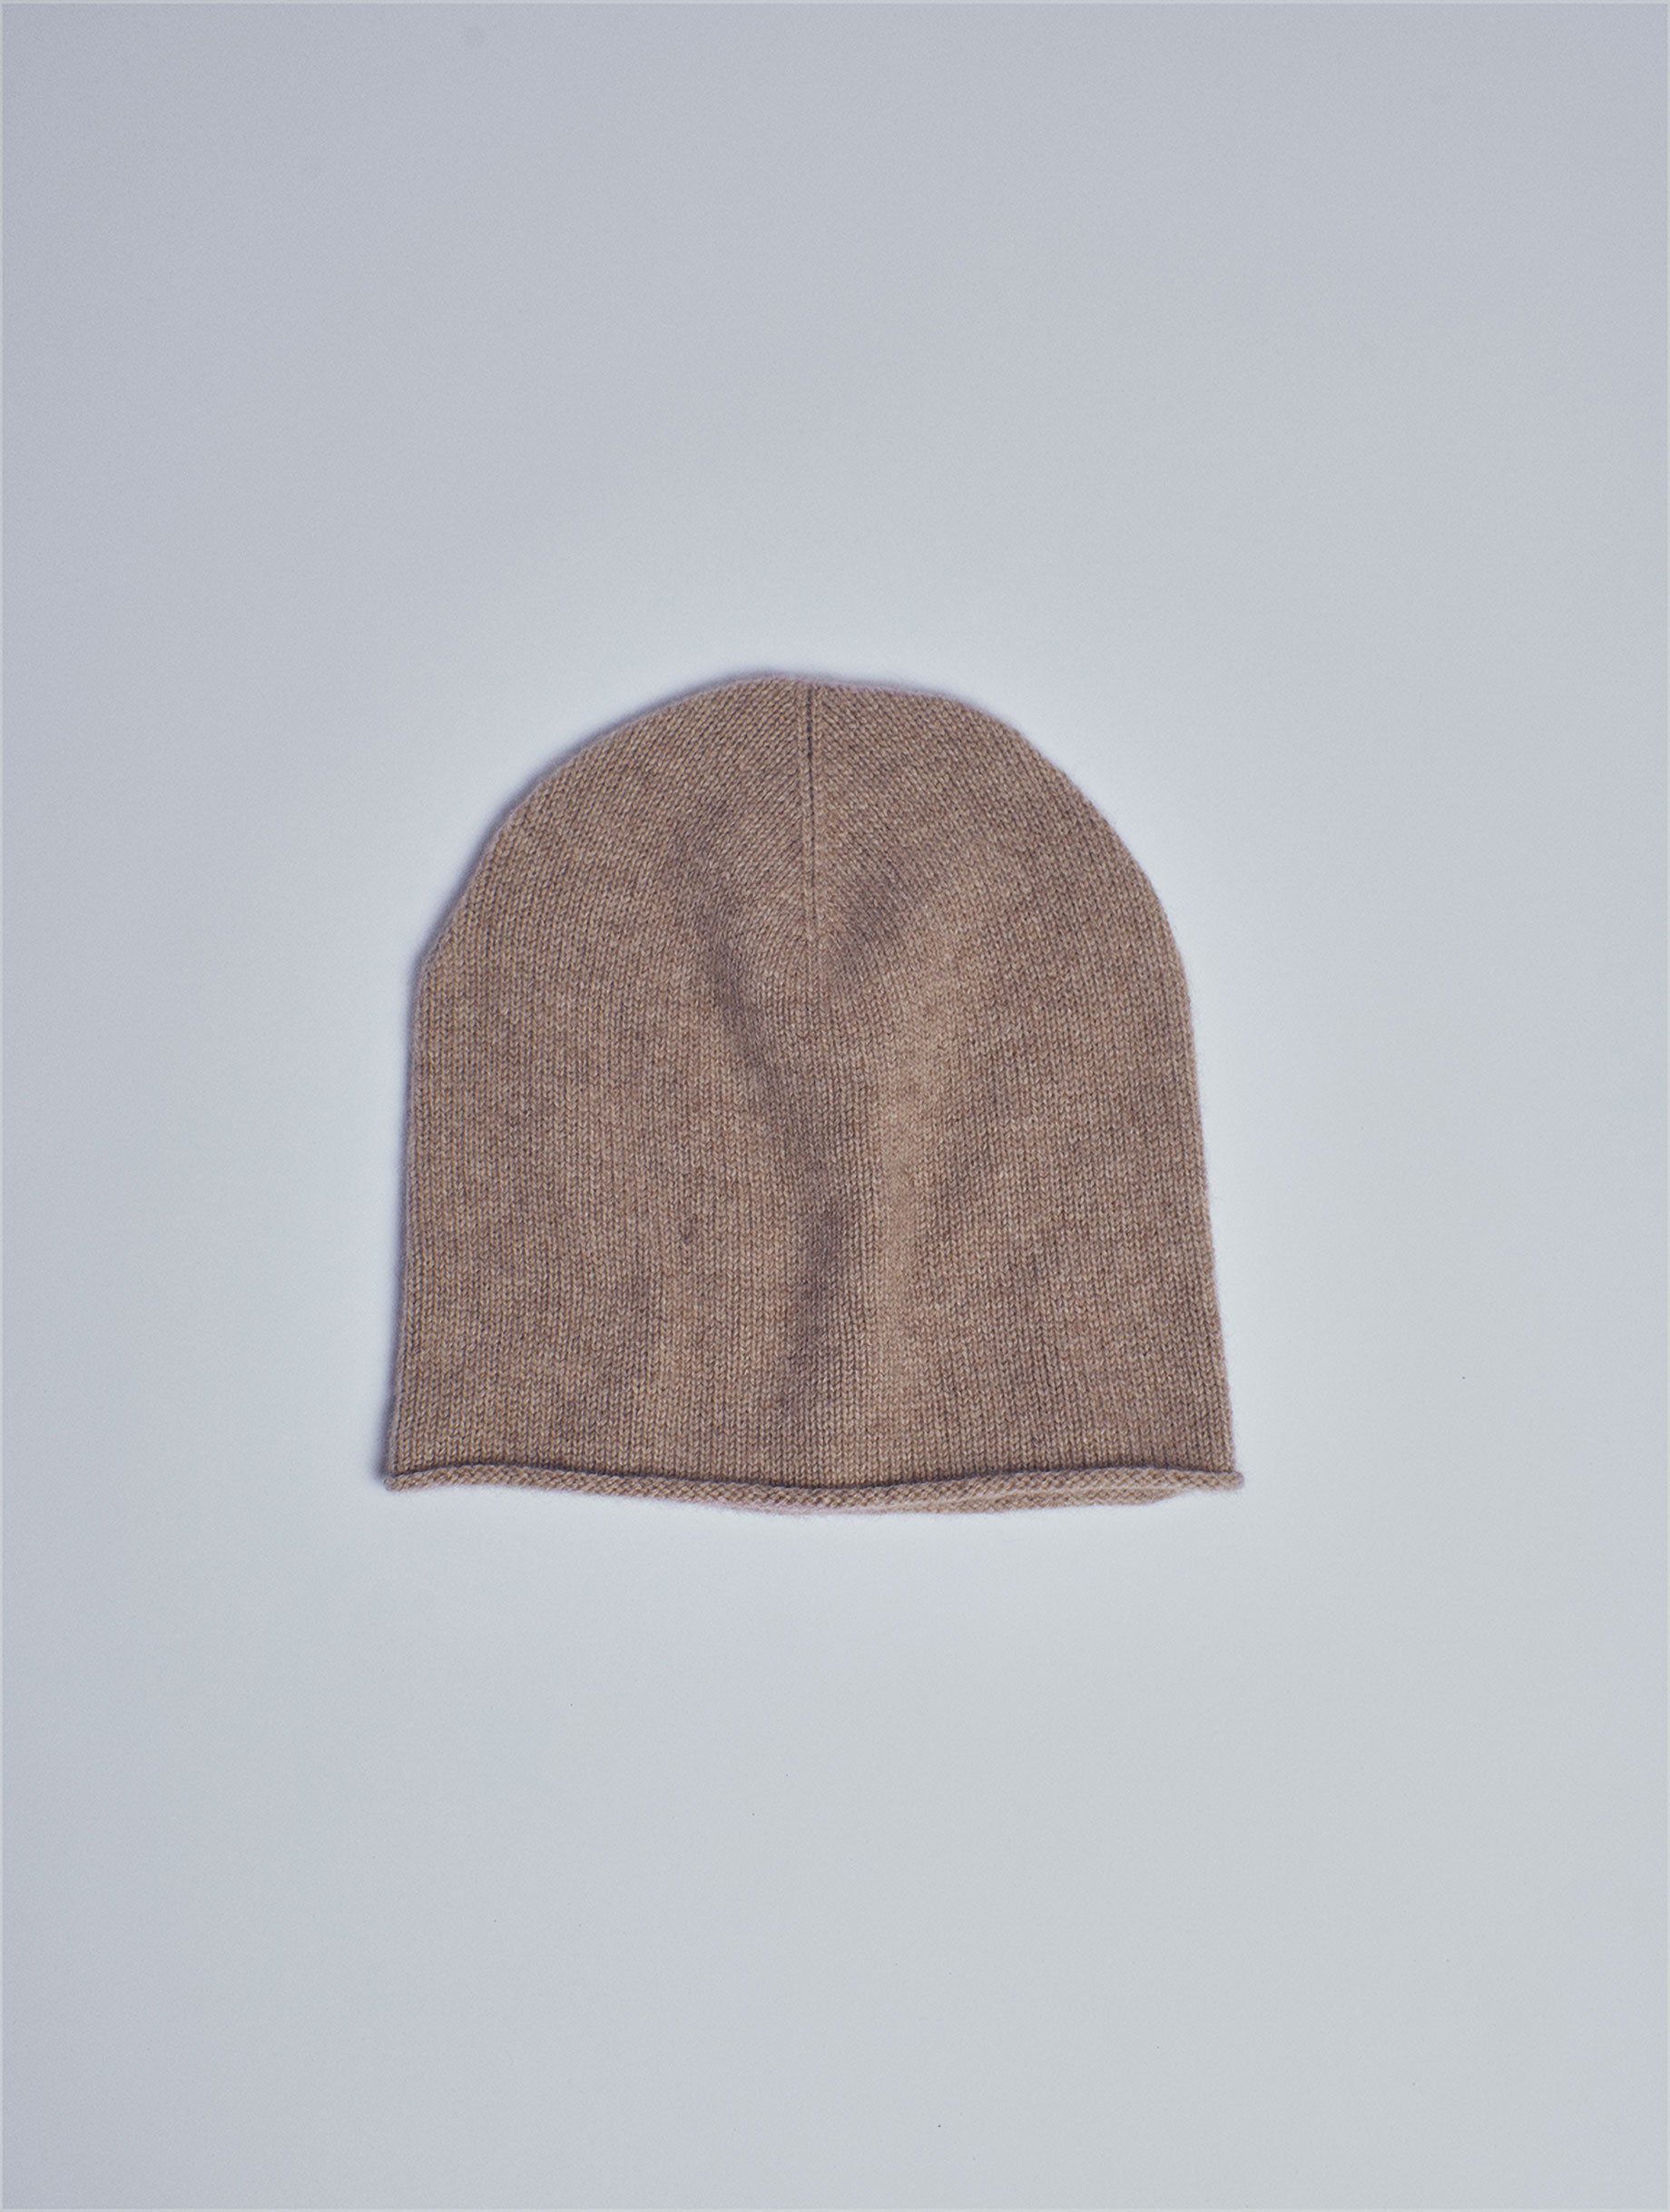 CATA Cashmere knitted beanie hat